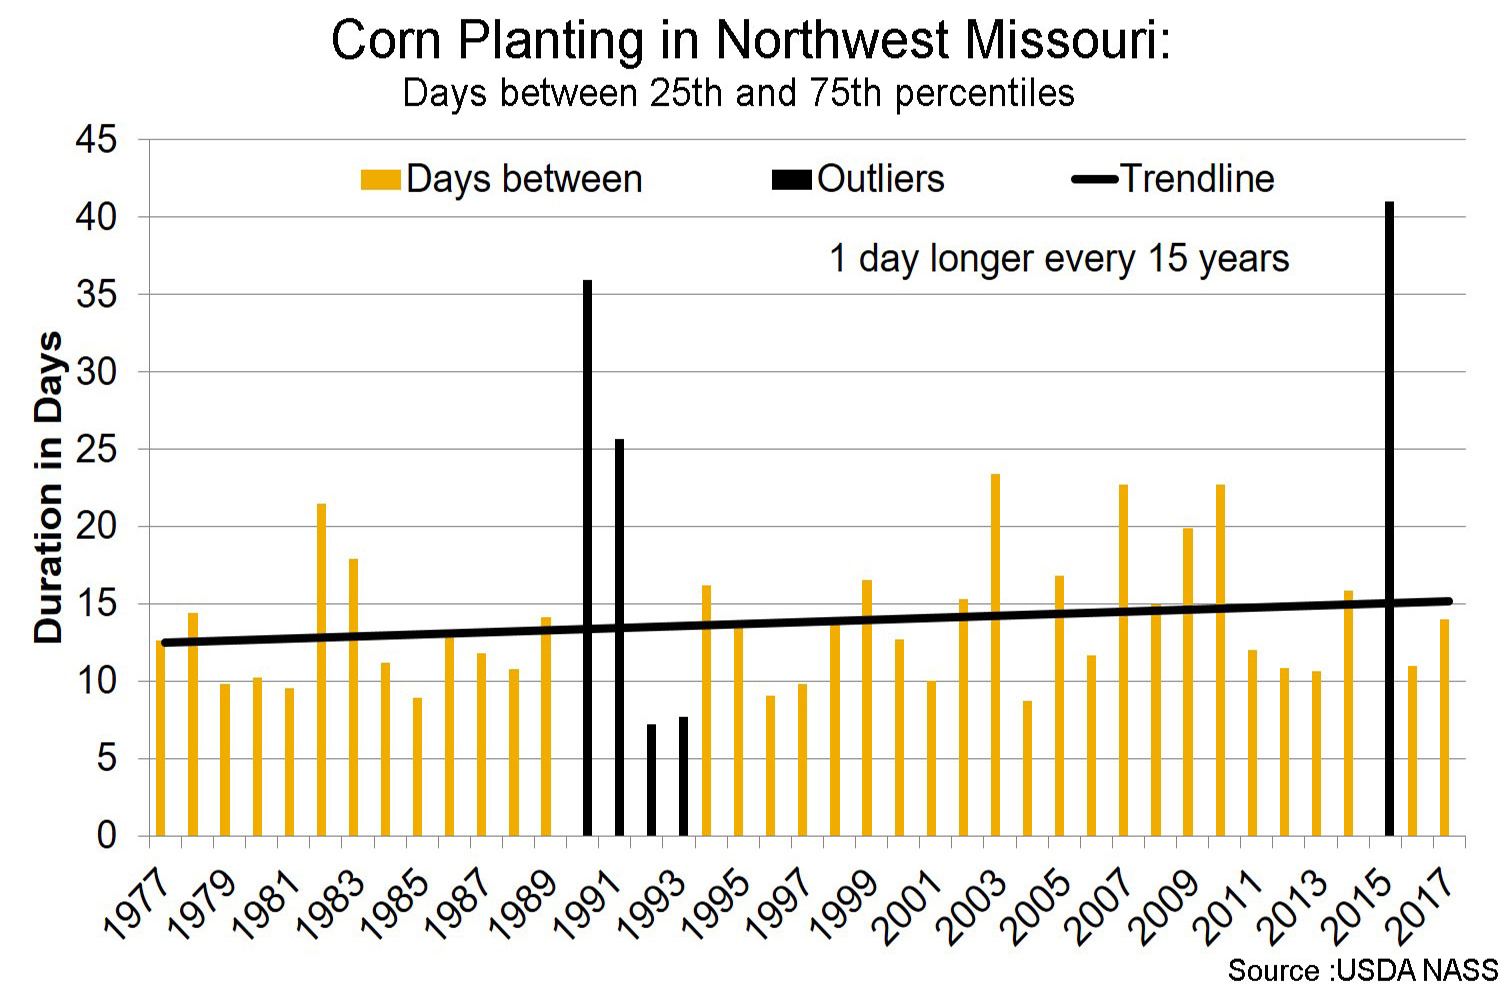 Corn planting in Northwest Missouri days between 25th and 75th percentiles chart